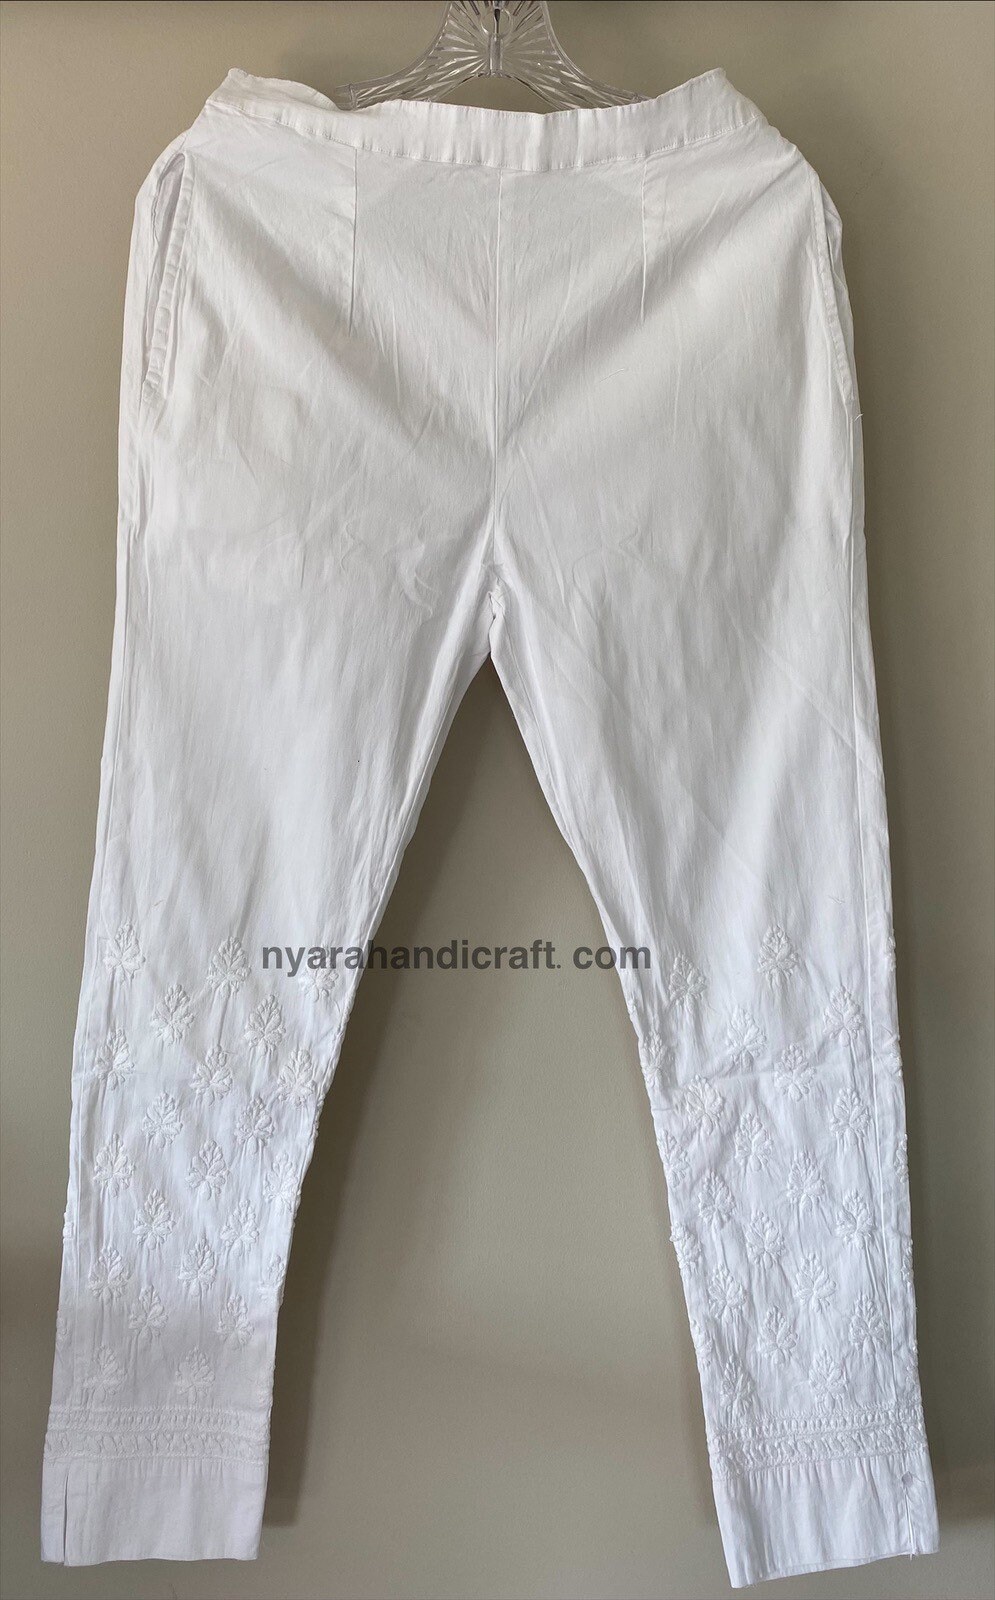 Buy nAzAqAt Chikankari Ankle Length Trousers (Pants) with Side Pockets Fine  Cotton Lycra Pants Free Size White at Amazon.in